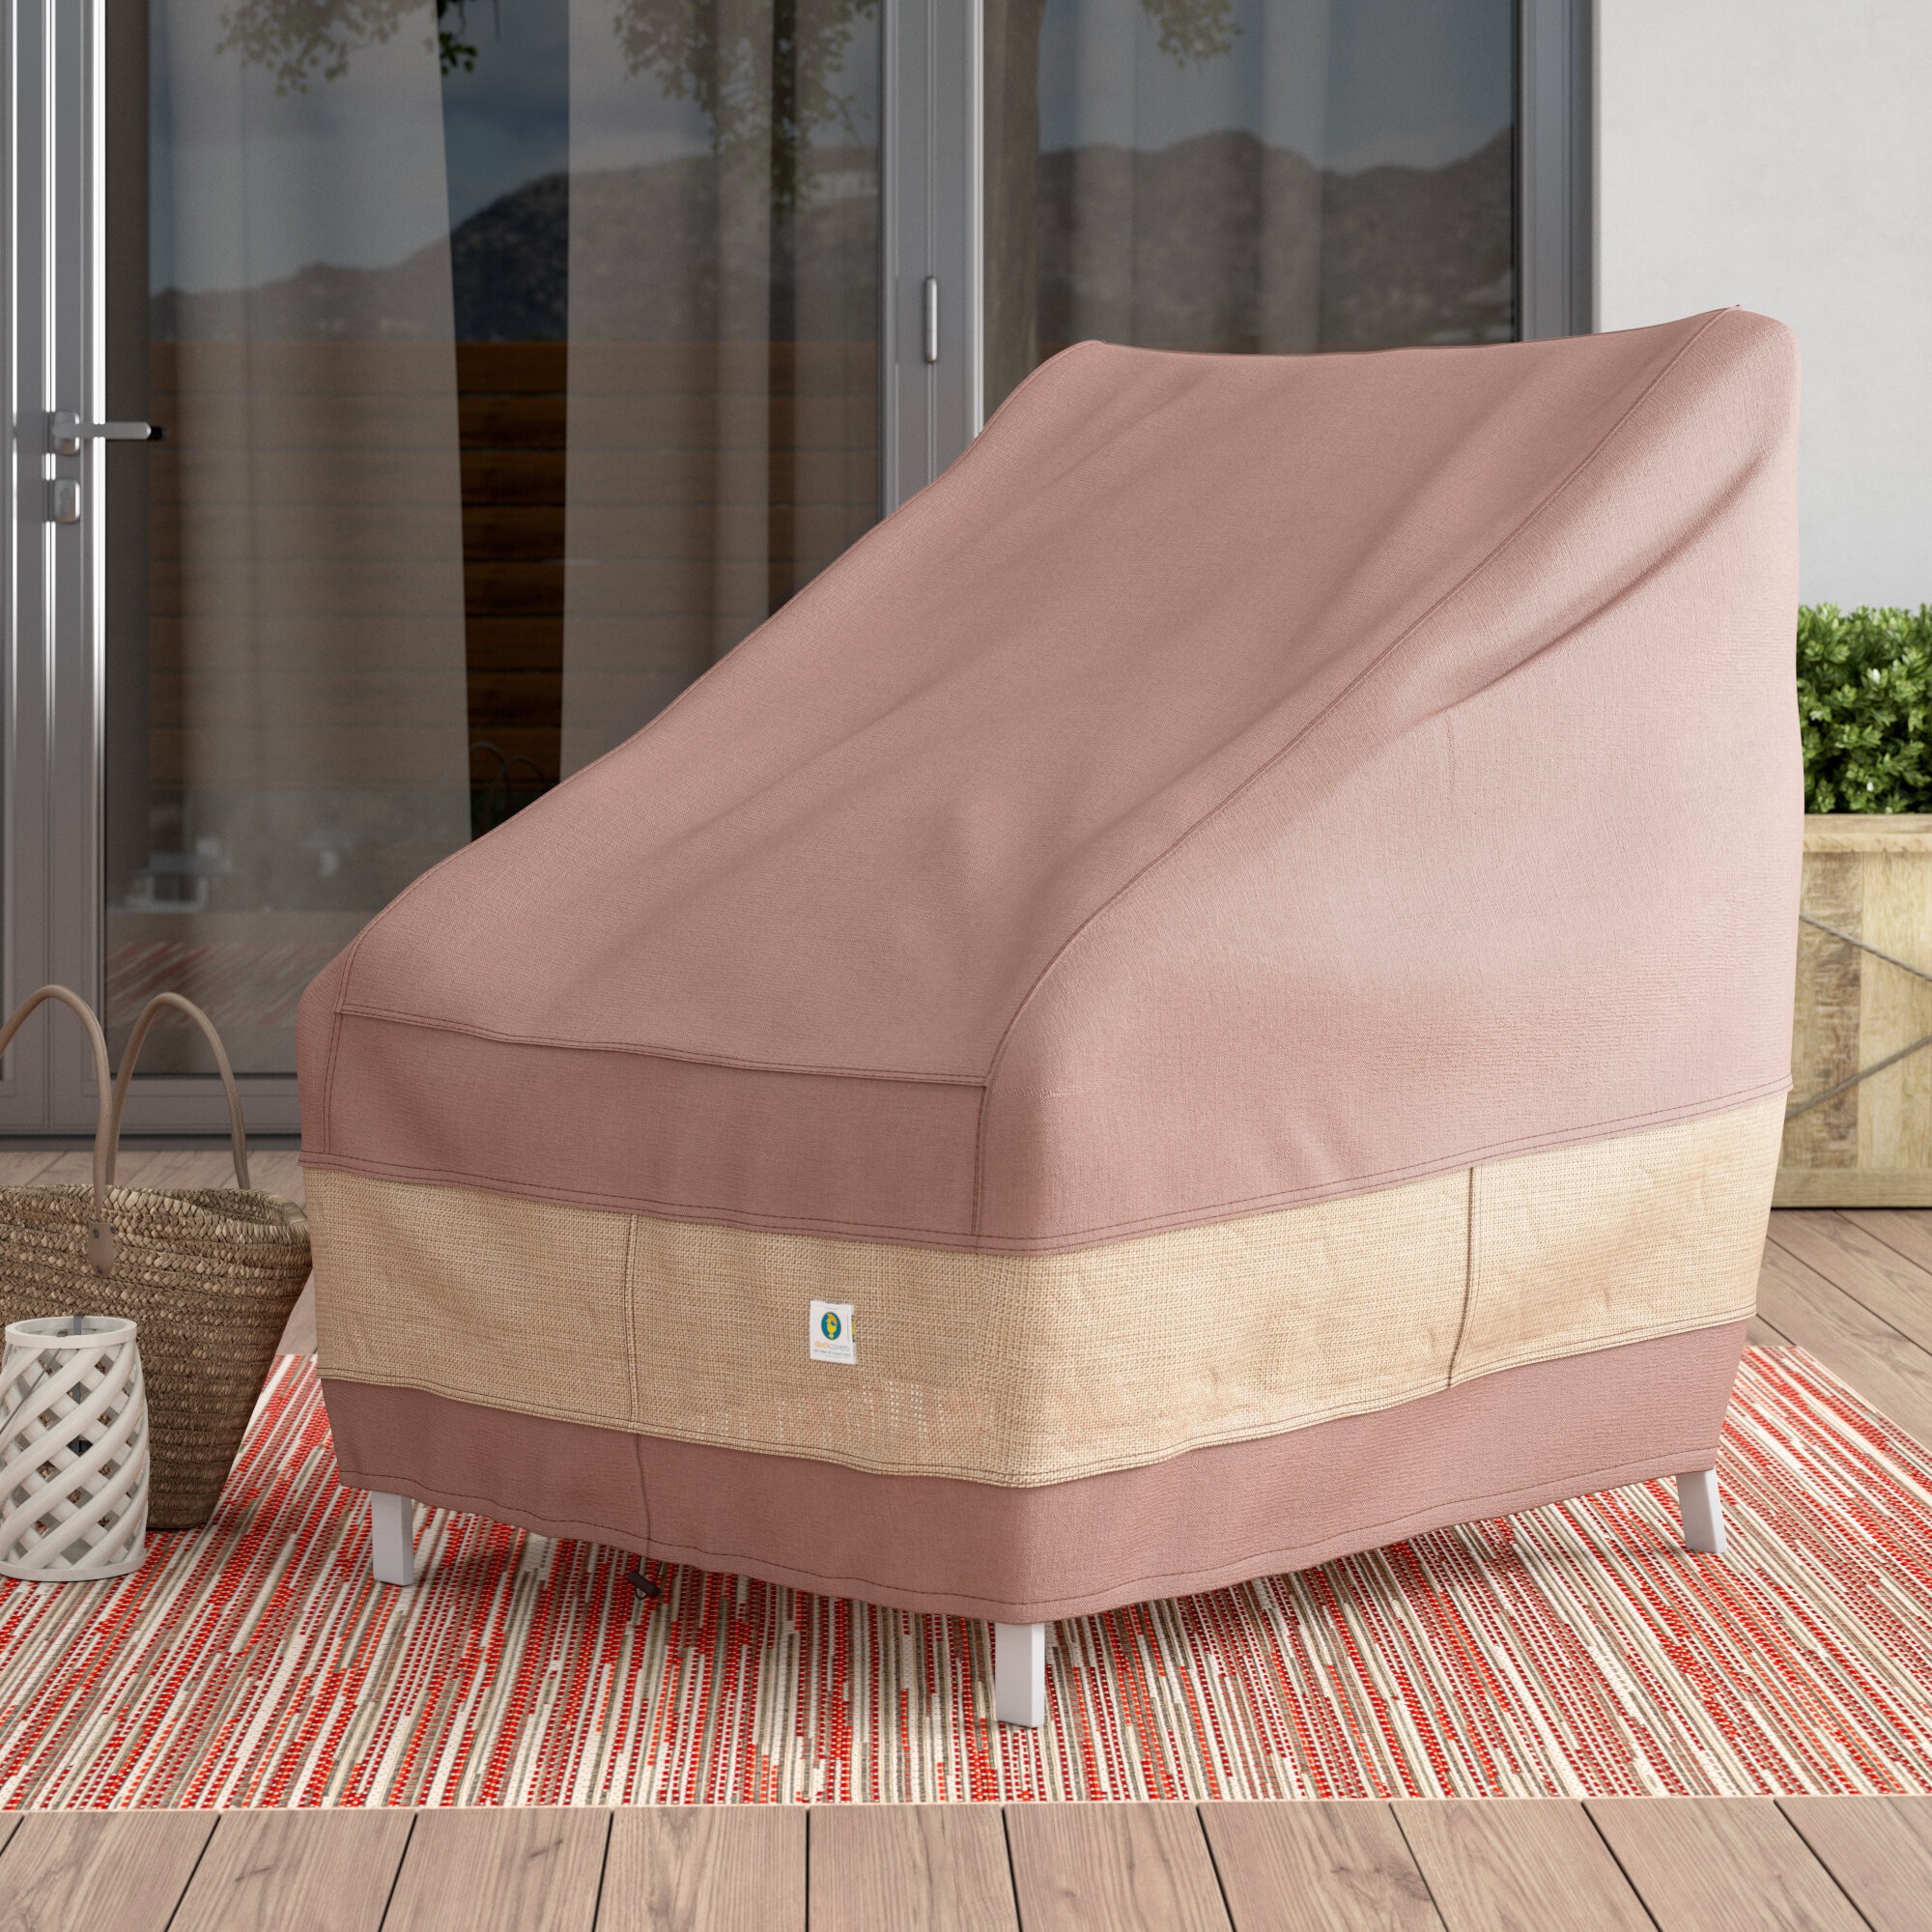 Nicholls Water Resistant Patio Chair Cover